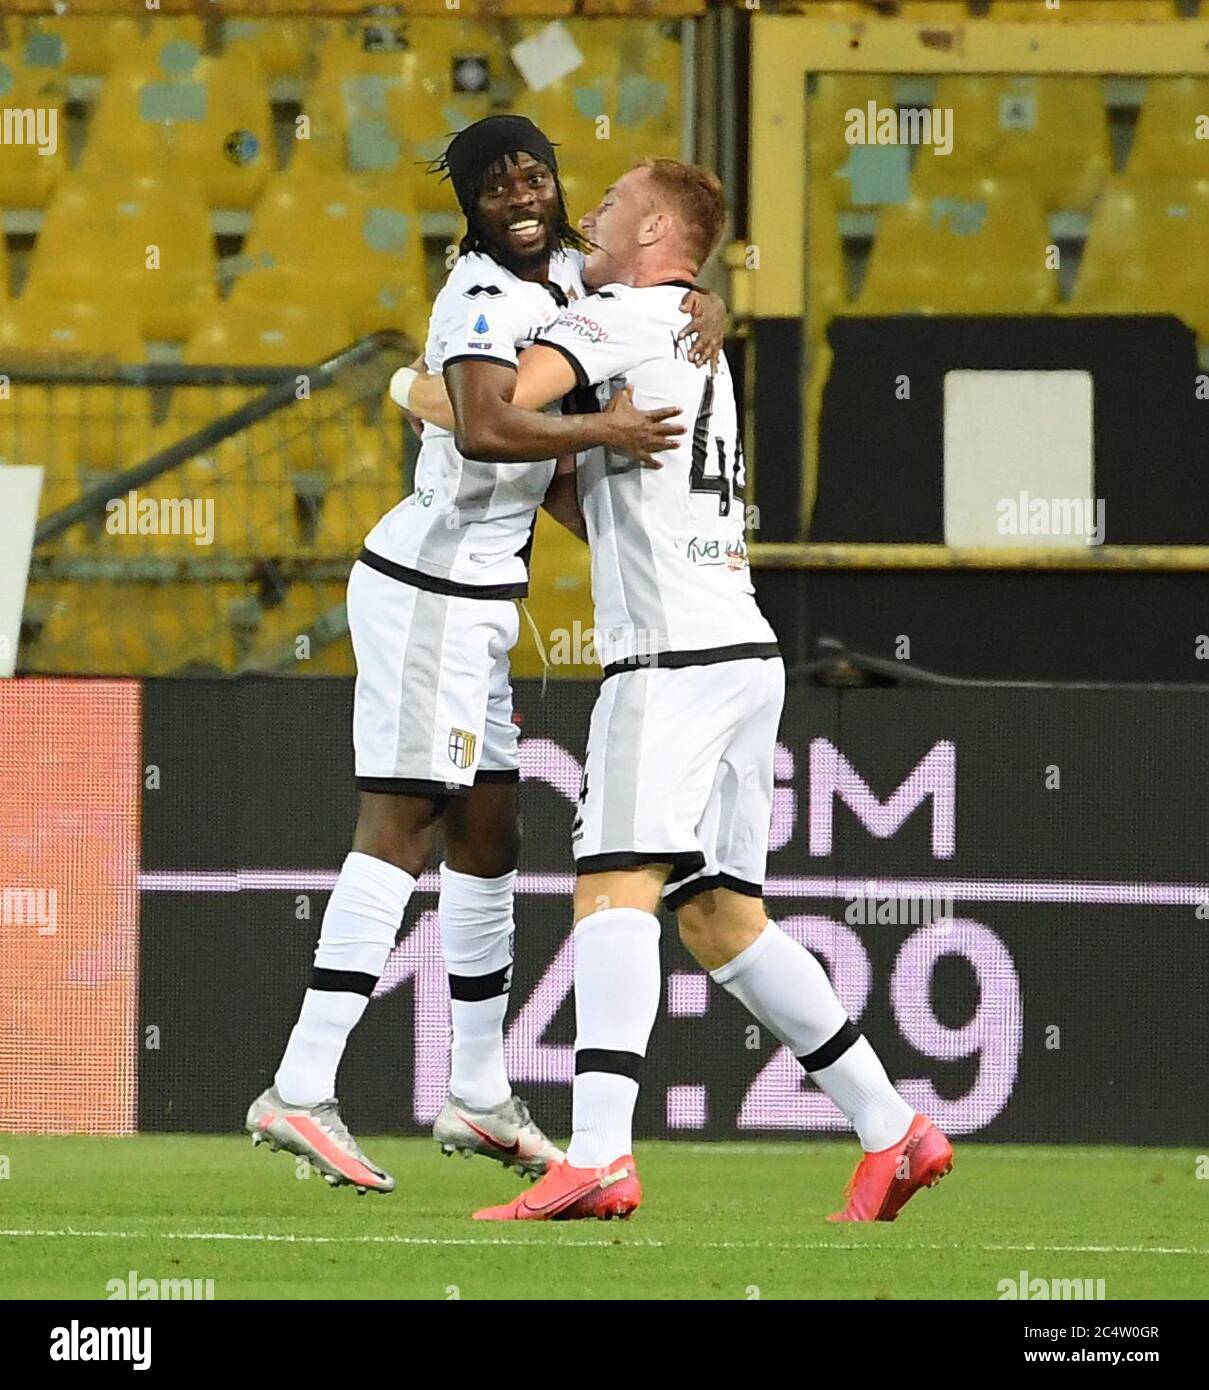 Parma, Italy. 28th June, 2020. Parma's Gervinho celebrates his goal with Dejan Kulusevski (R) during a Serie A match between Parma and Inter Milan in Parma, Italy, June 28, 2020. Credit: Alberto Lingria/Xinhua/Alamy Live News Stock Photo